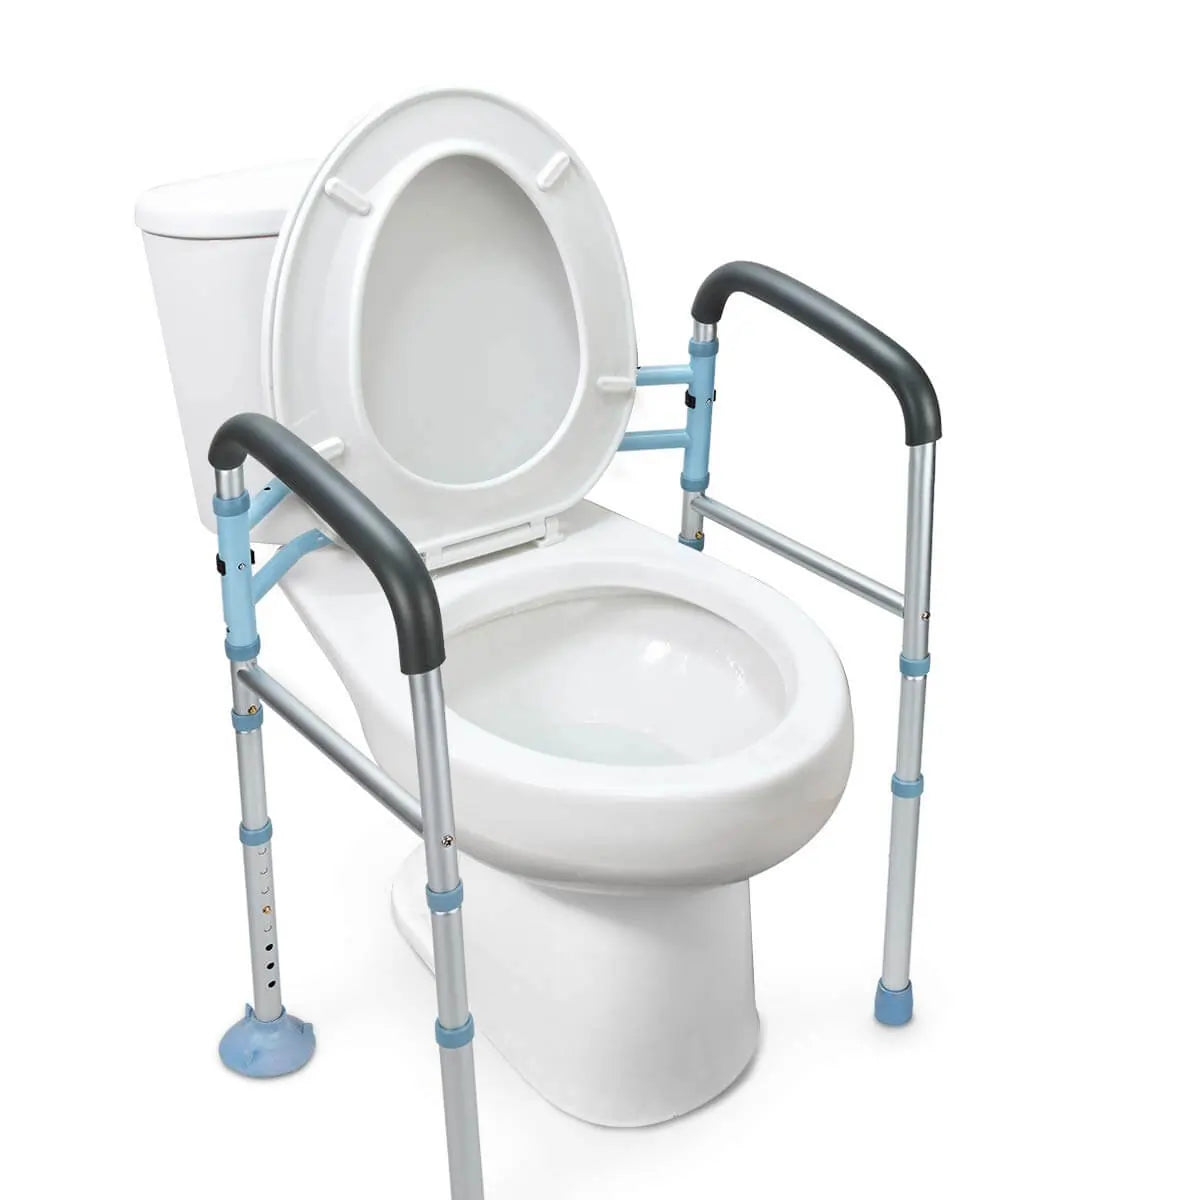 KosmoCare Compact Toilet Safety Rails - Steel - Assembly 